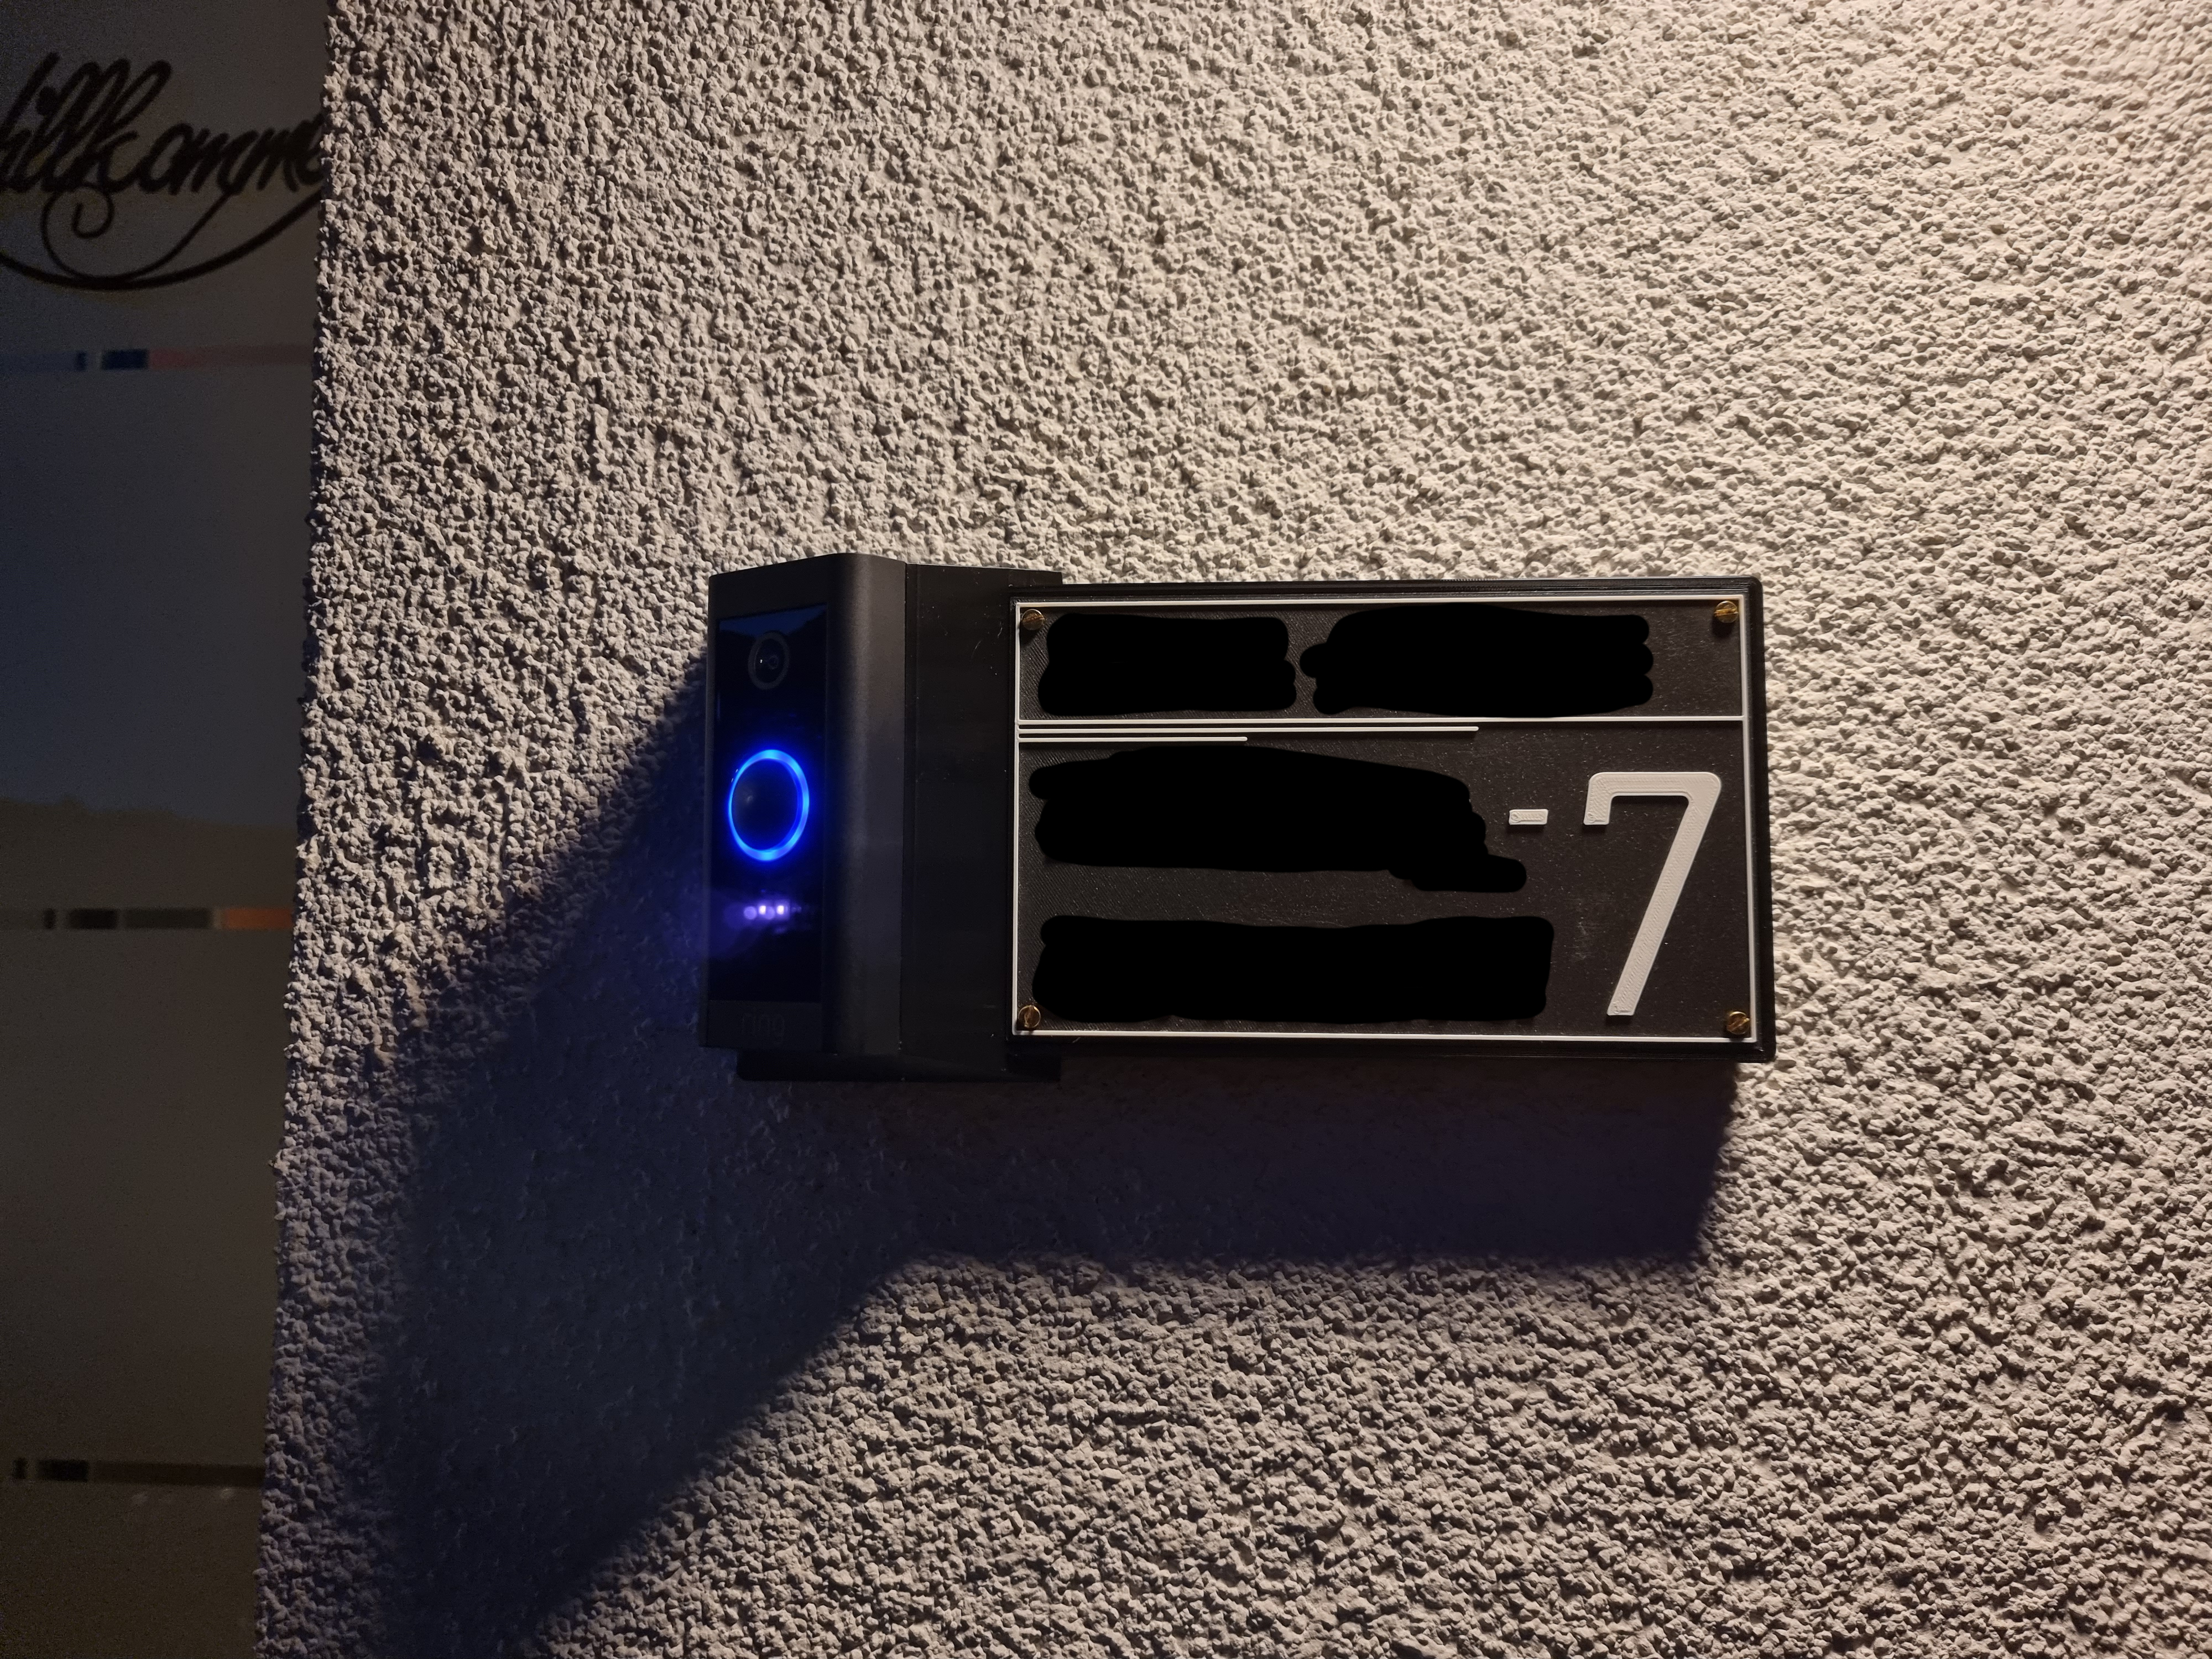 RING video doorbell - mounting unit with name faceplate